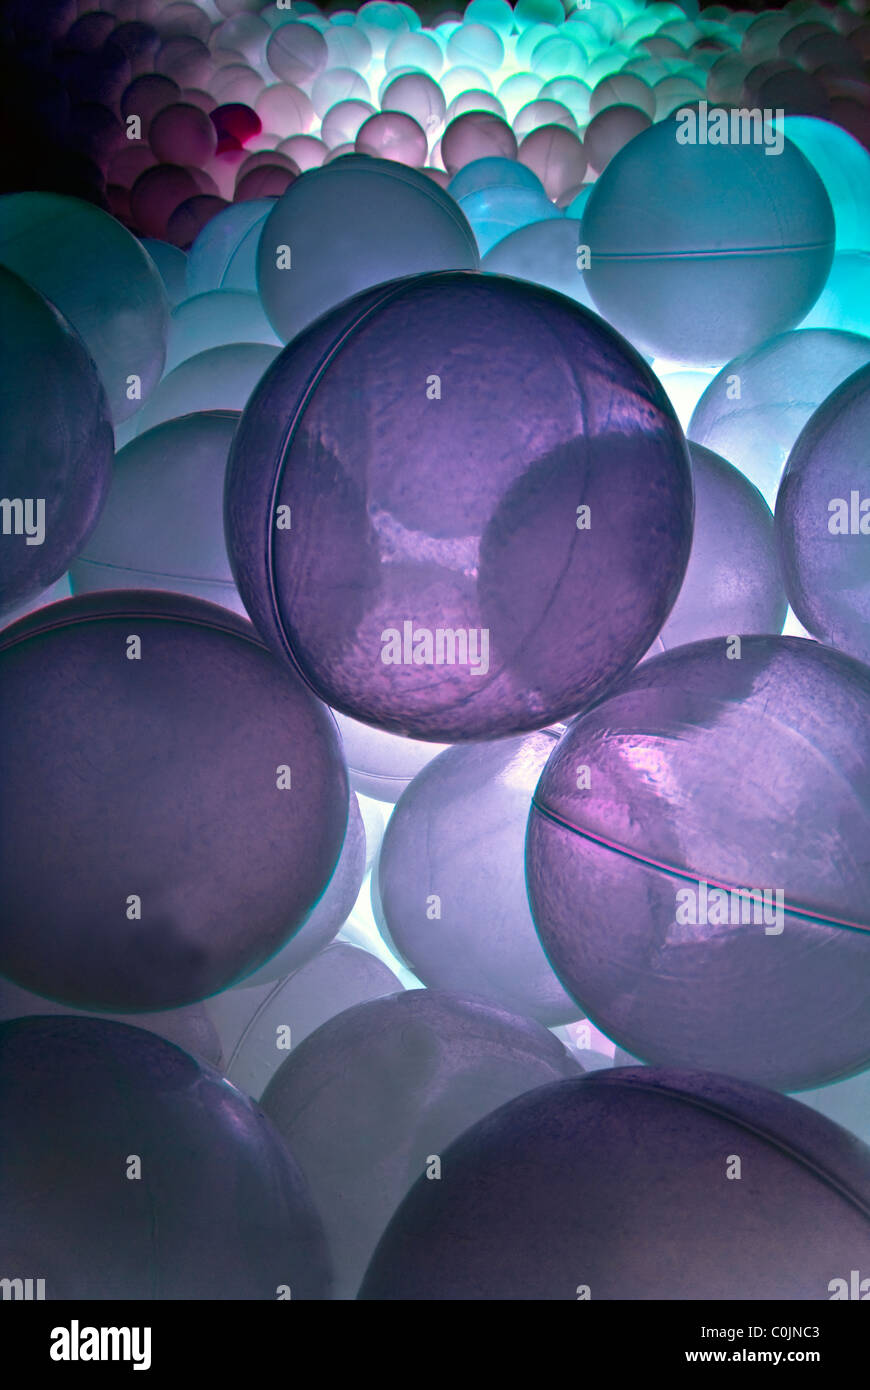 Ball pool with purple light in the light sensory room. Stock Photo